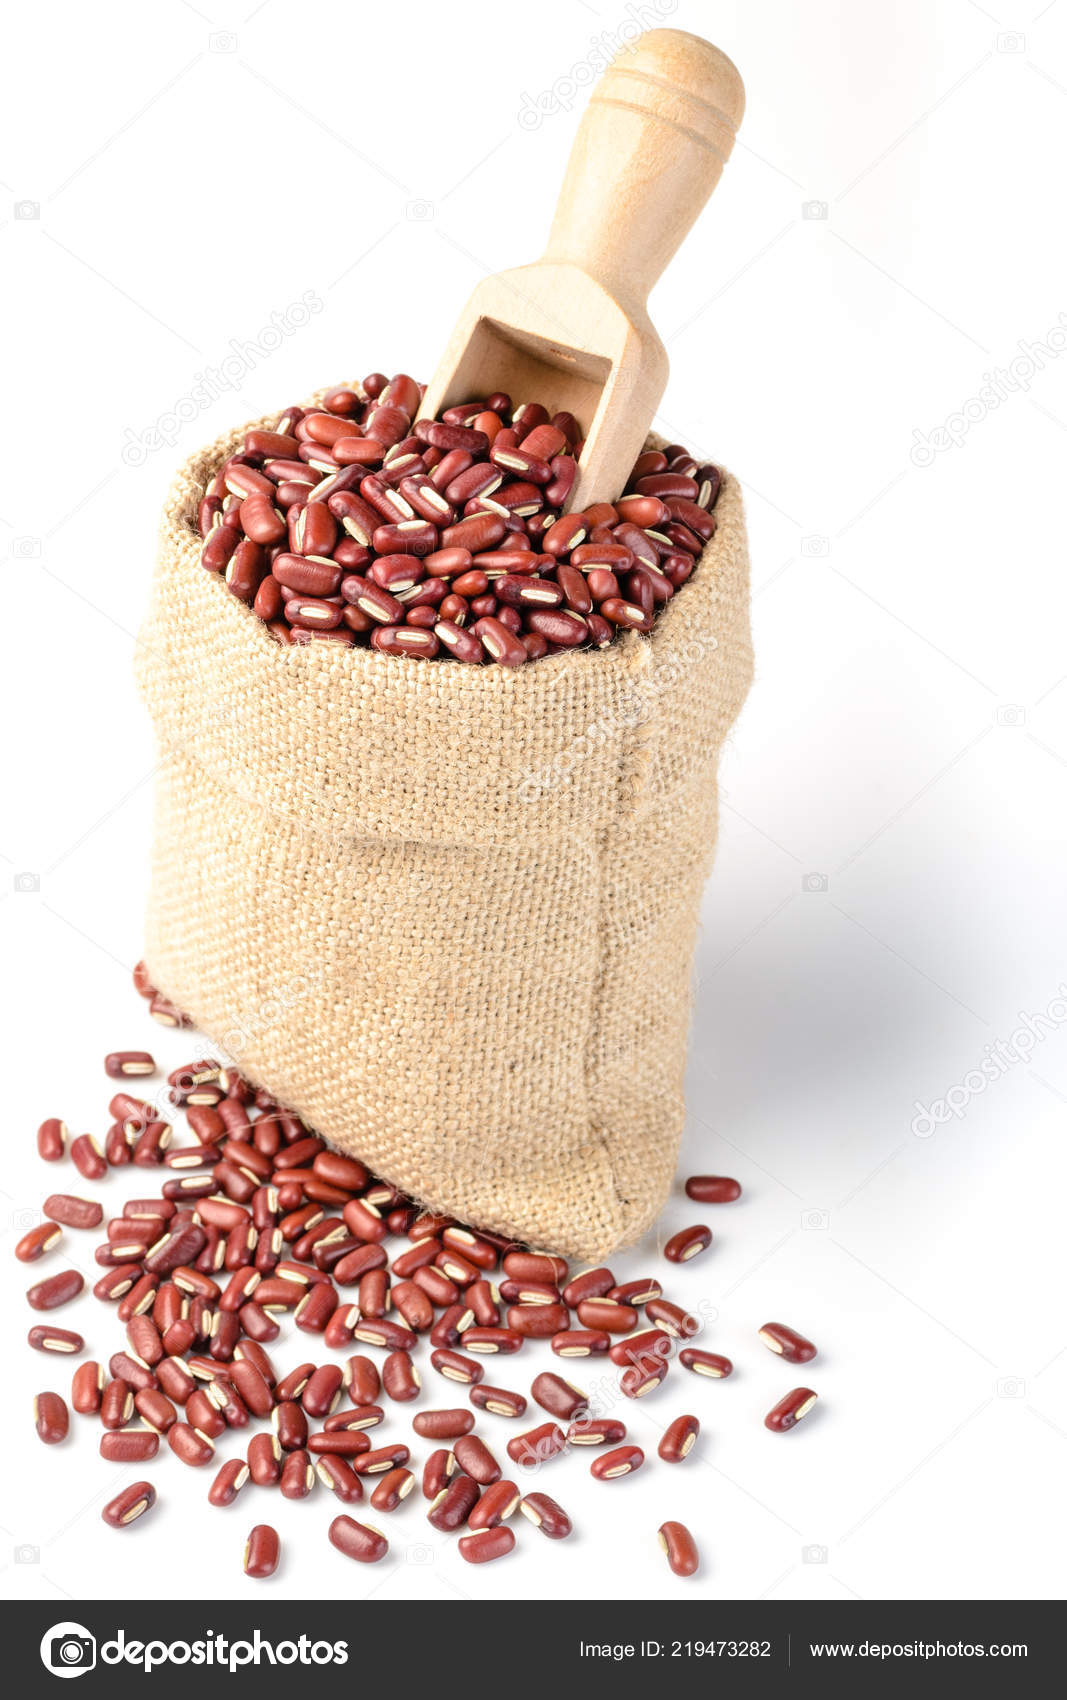 Red Kidney Bean Cranberry In Burlap Sack Bag Isolated On White Background  Stock Photo - Download Image Now - iStock